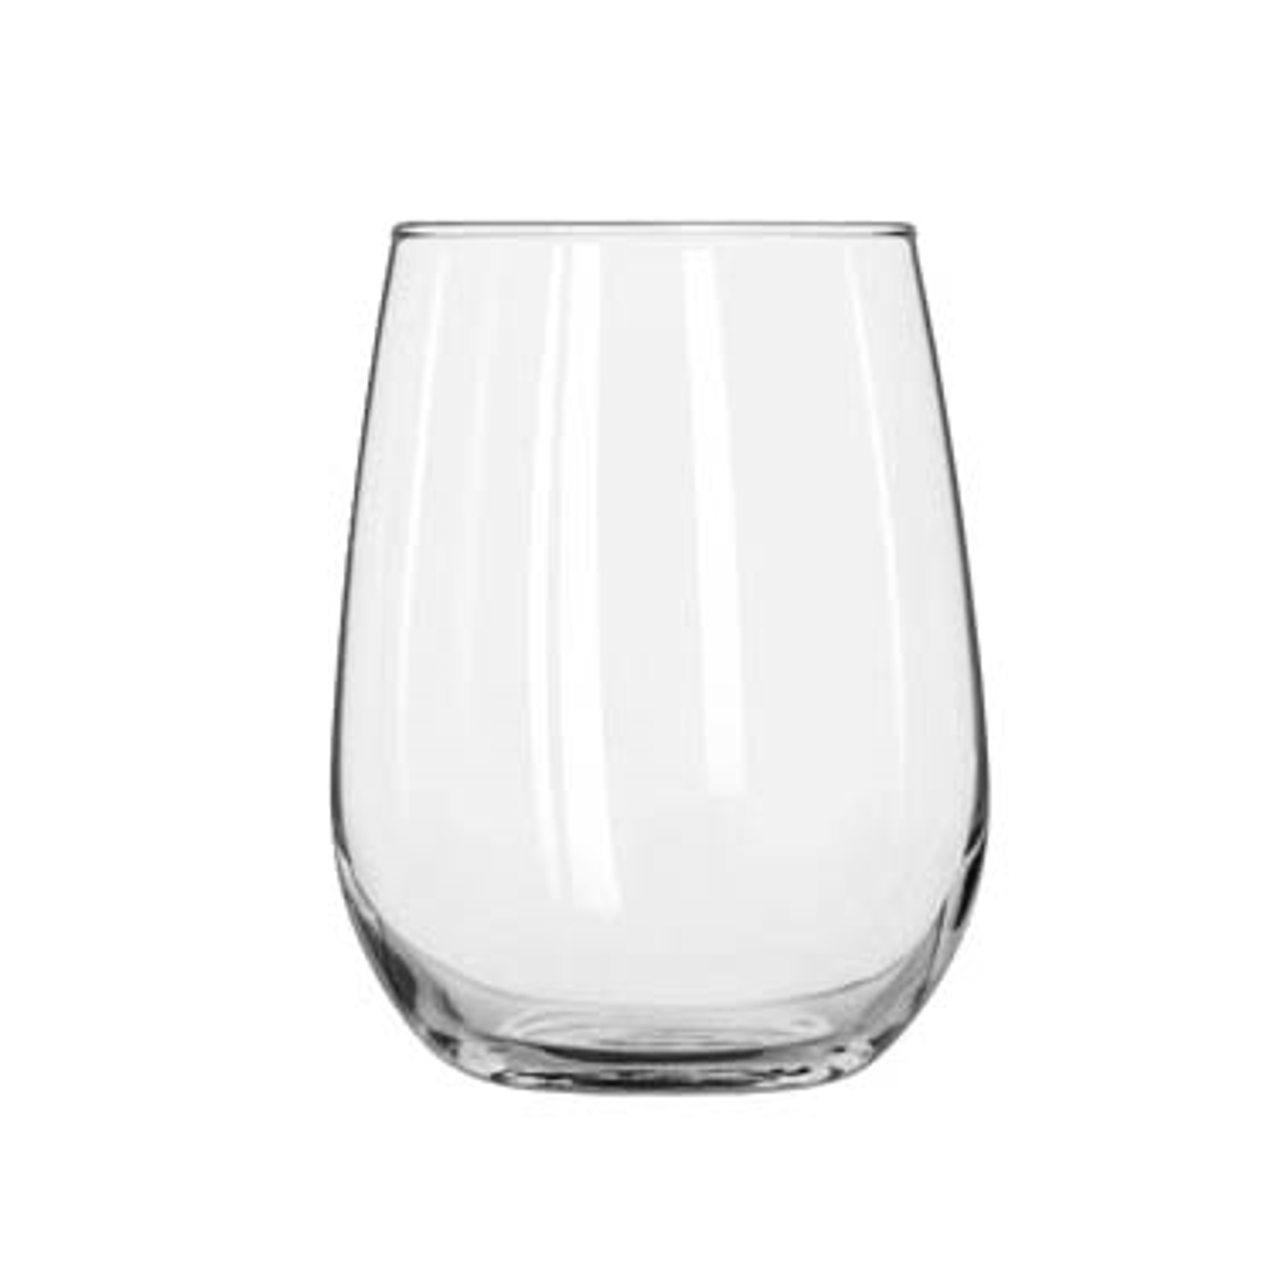 https://cdn11.bigcommerce.com/s-g3i86bef61/images/stencil/1280x1280/products/1496/4221/Libbey-221-Stemless-Wine-Glass__56043.1667492323.png?c=1